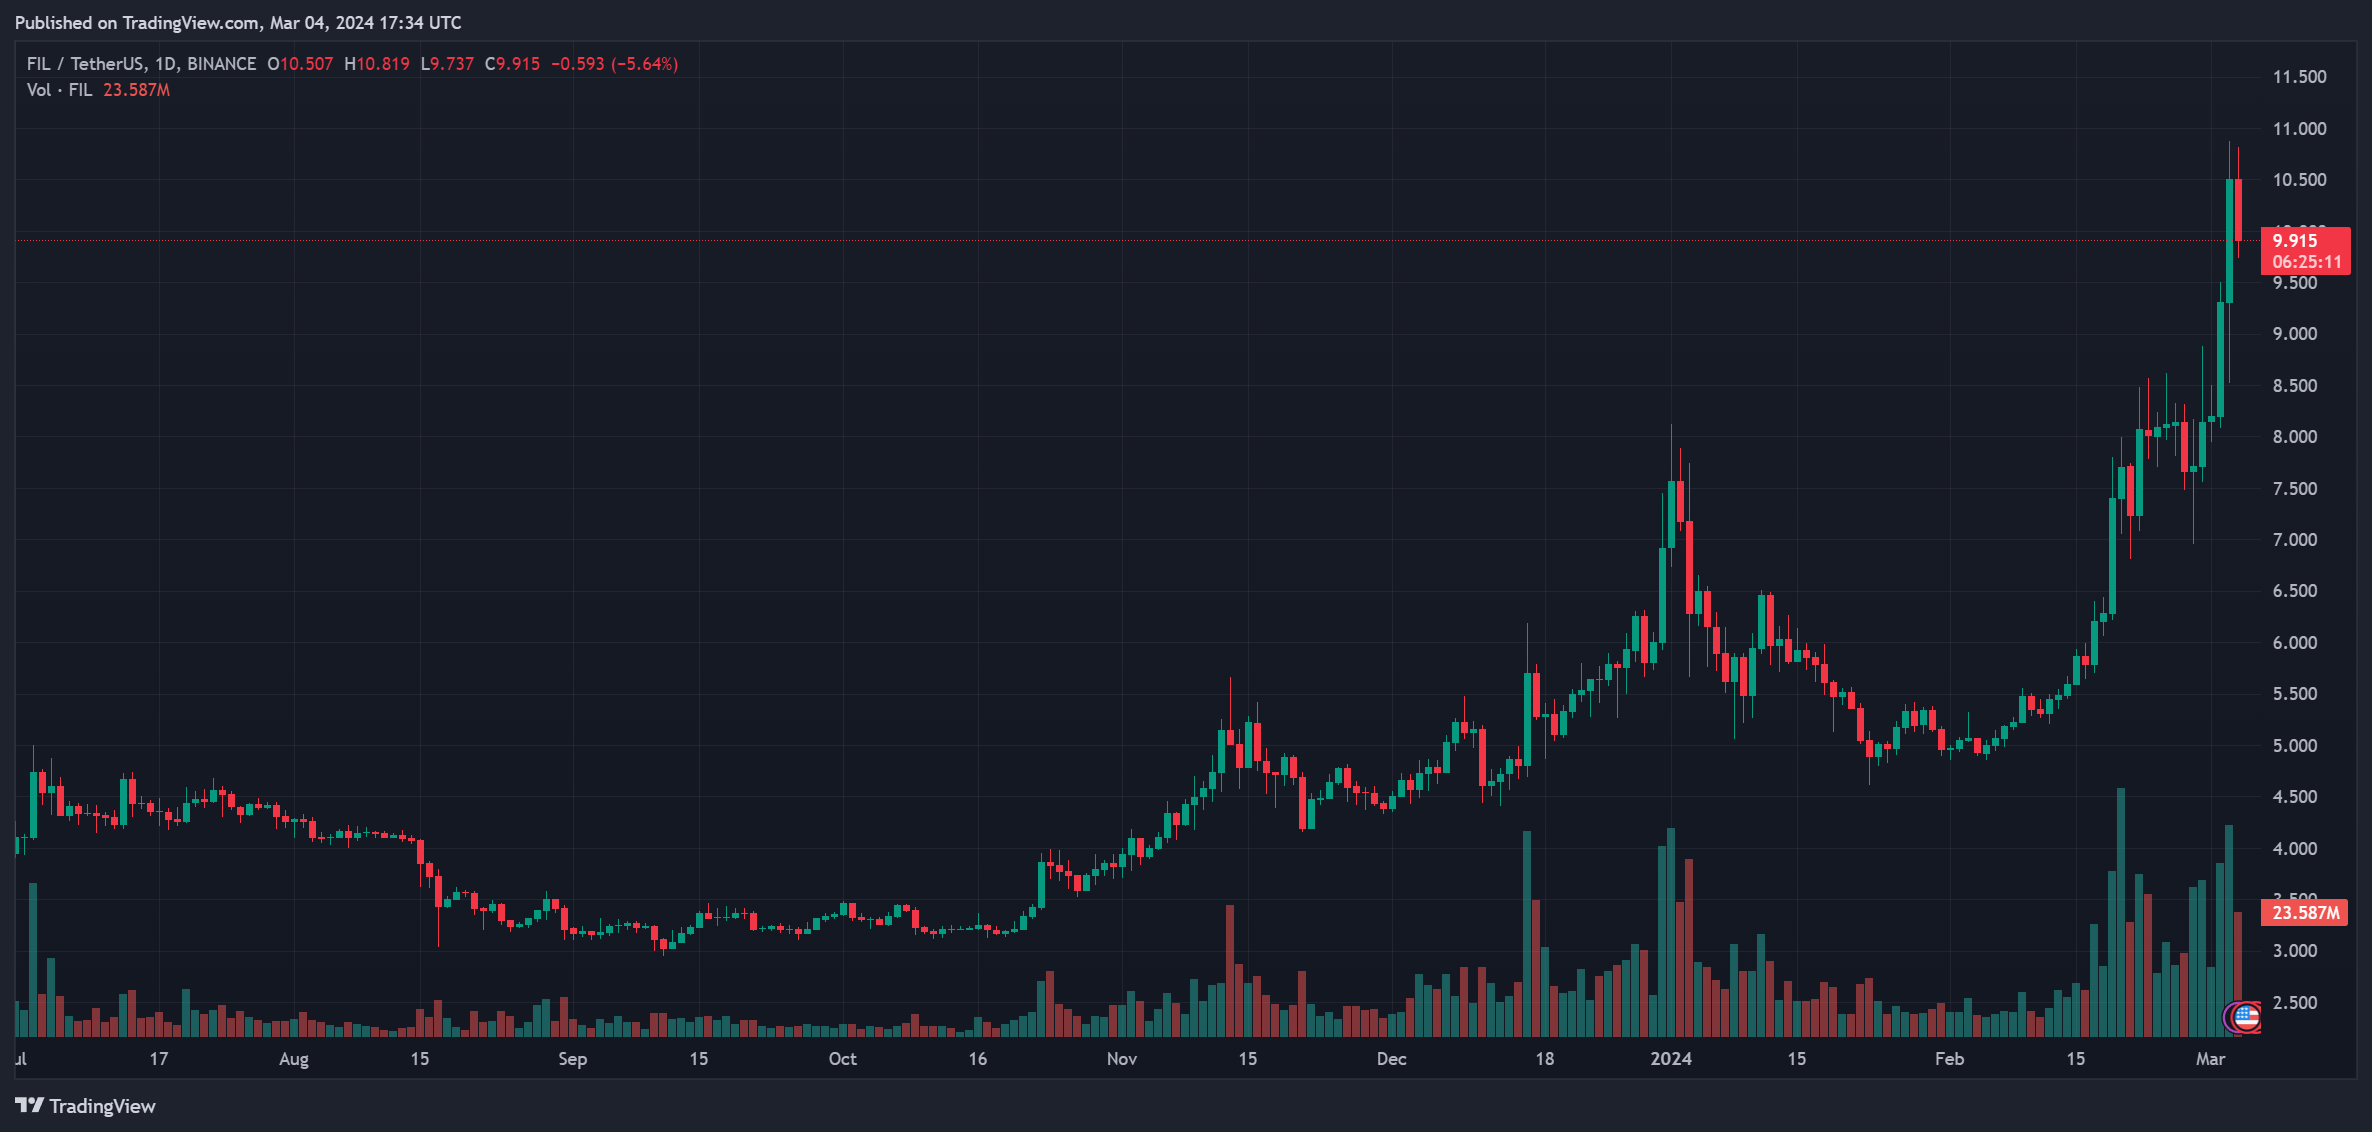 FIL’s price on the rise (Source: FILUSDT on Tradingview)